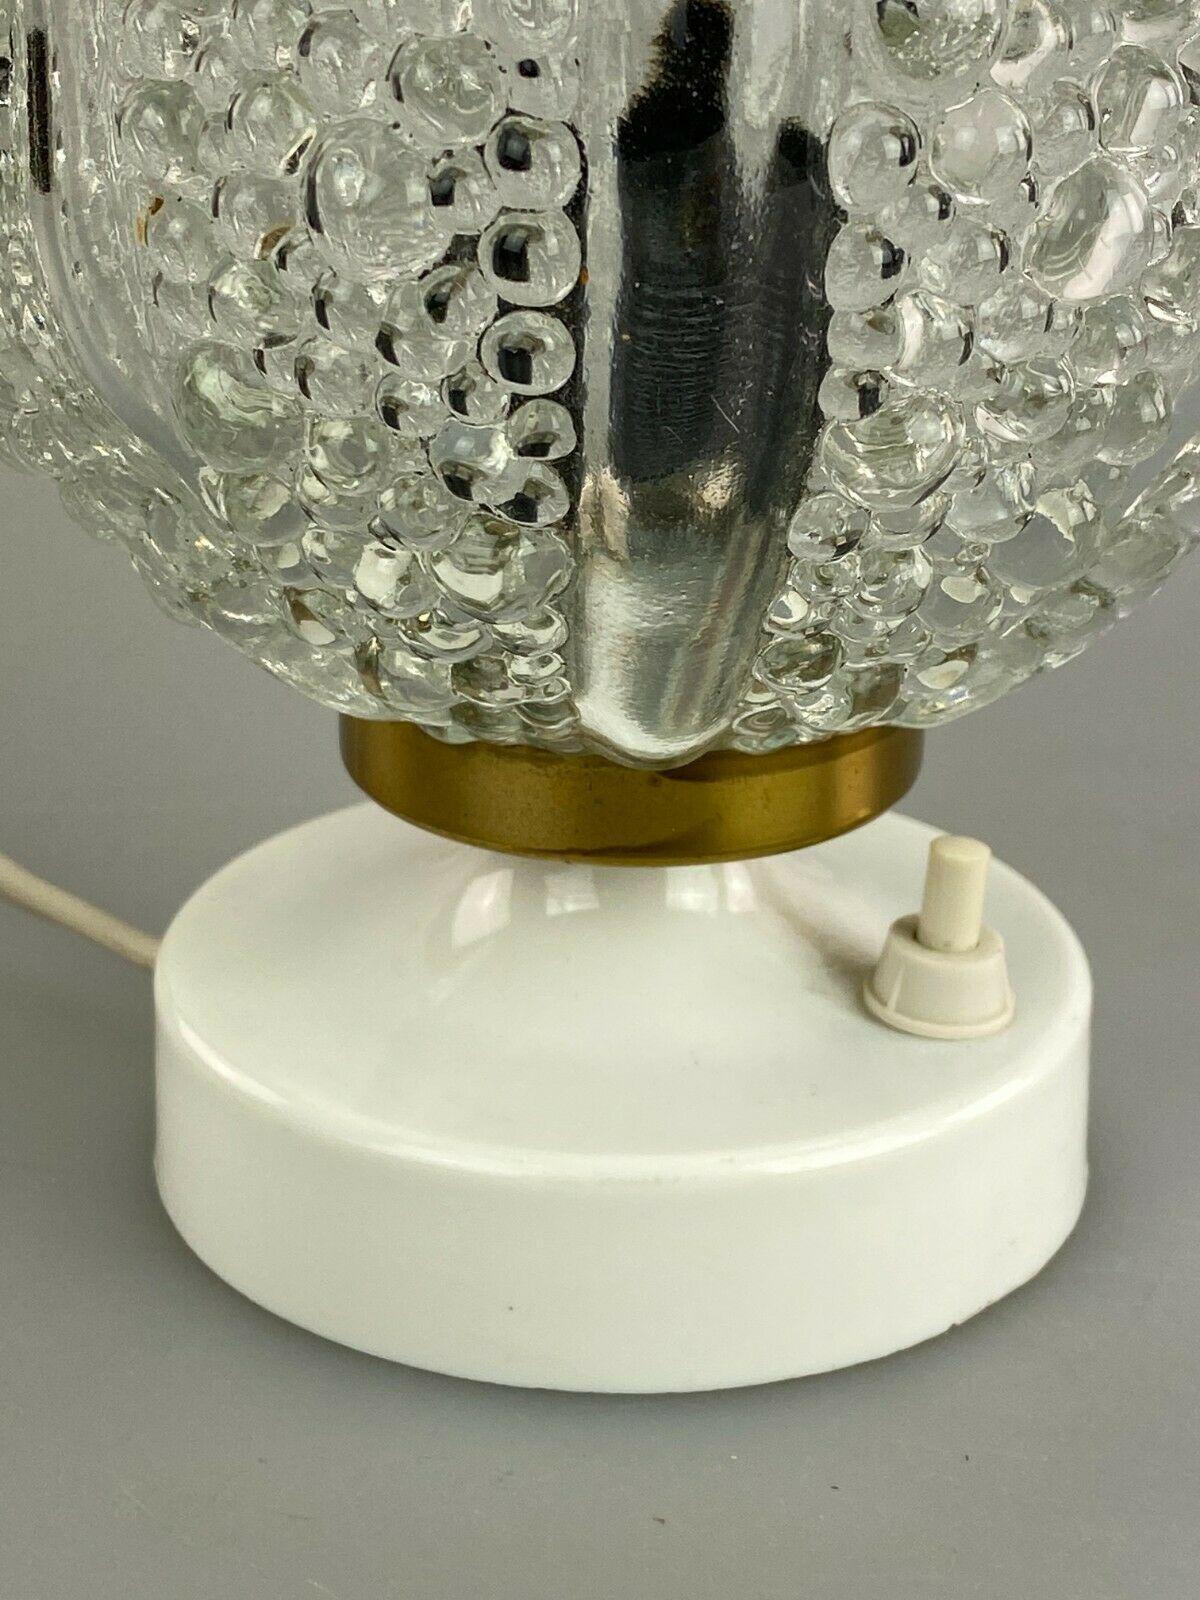 60s 70s Ball Lamp Light Table Lamp Bedside Lamp Space Age Design In Good Condition For Sale In Neuenkirchen, NI